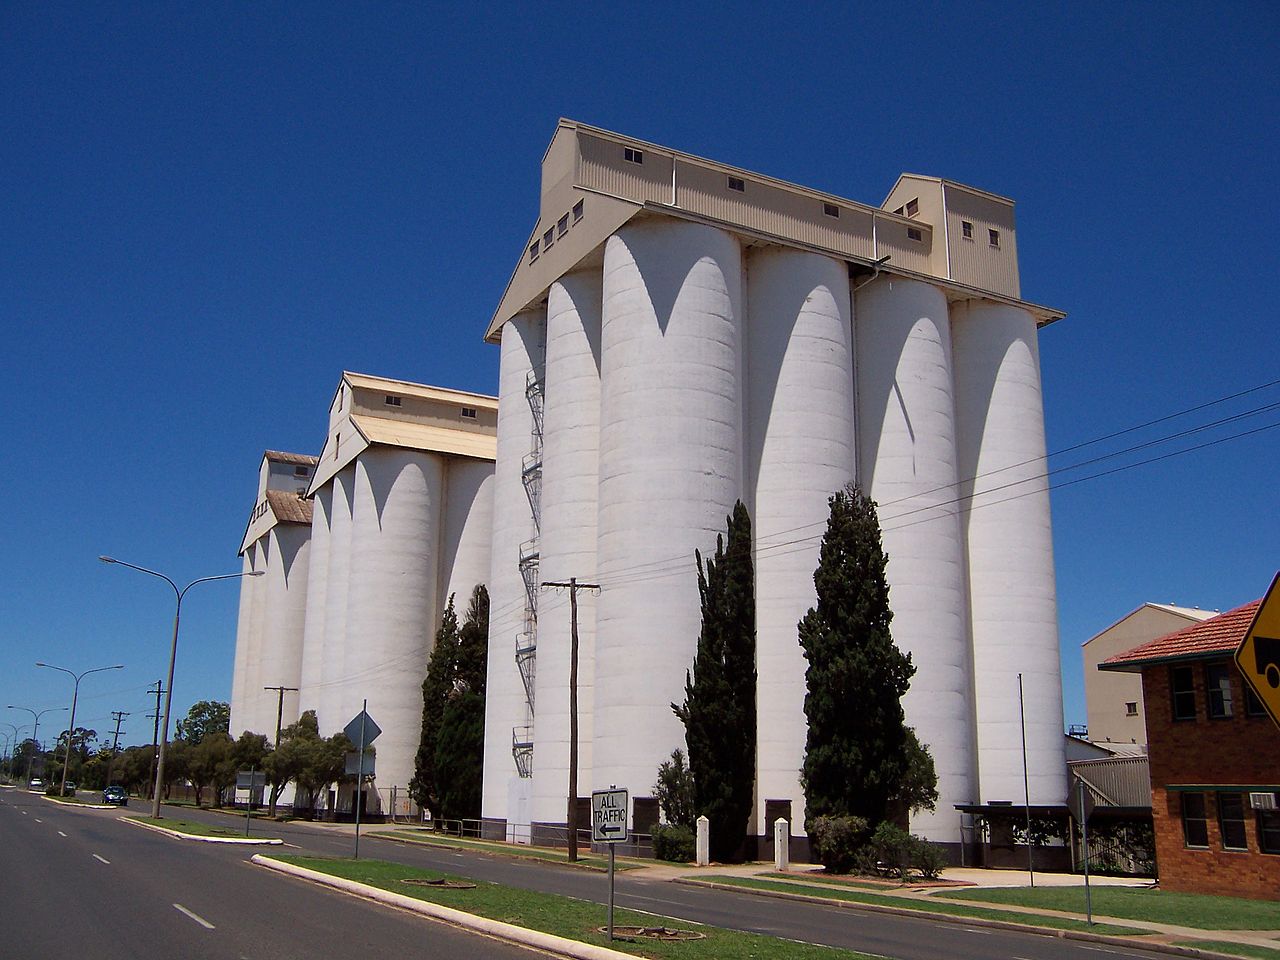 Many attractions, like the Heritage Listed Peanut Silos are within walking distance